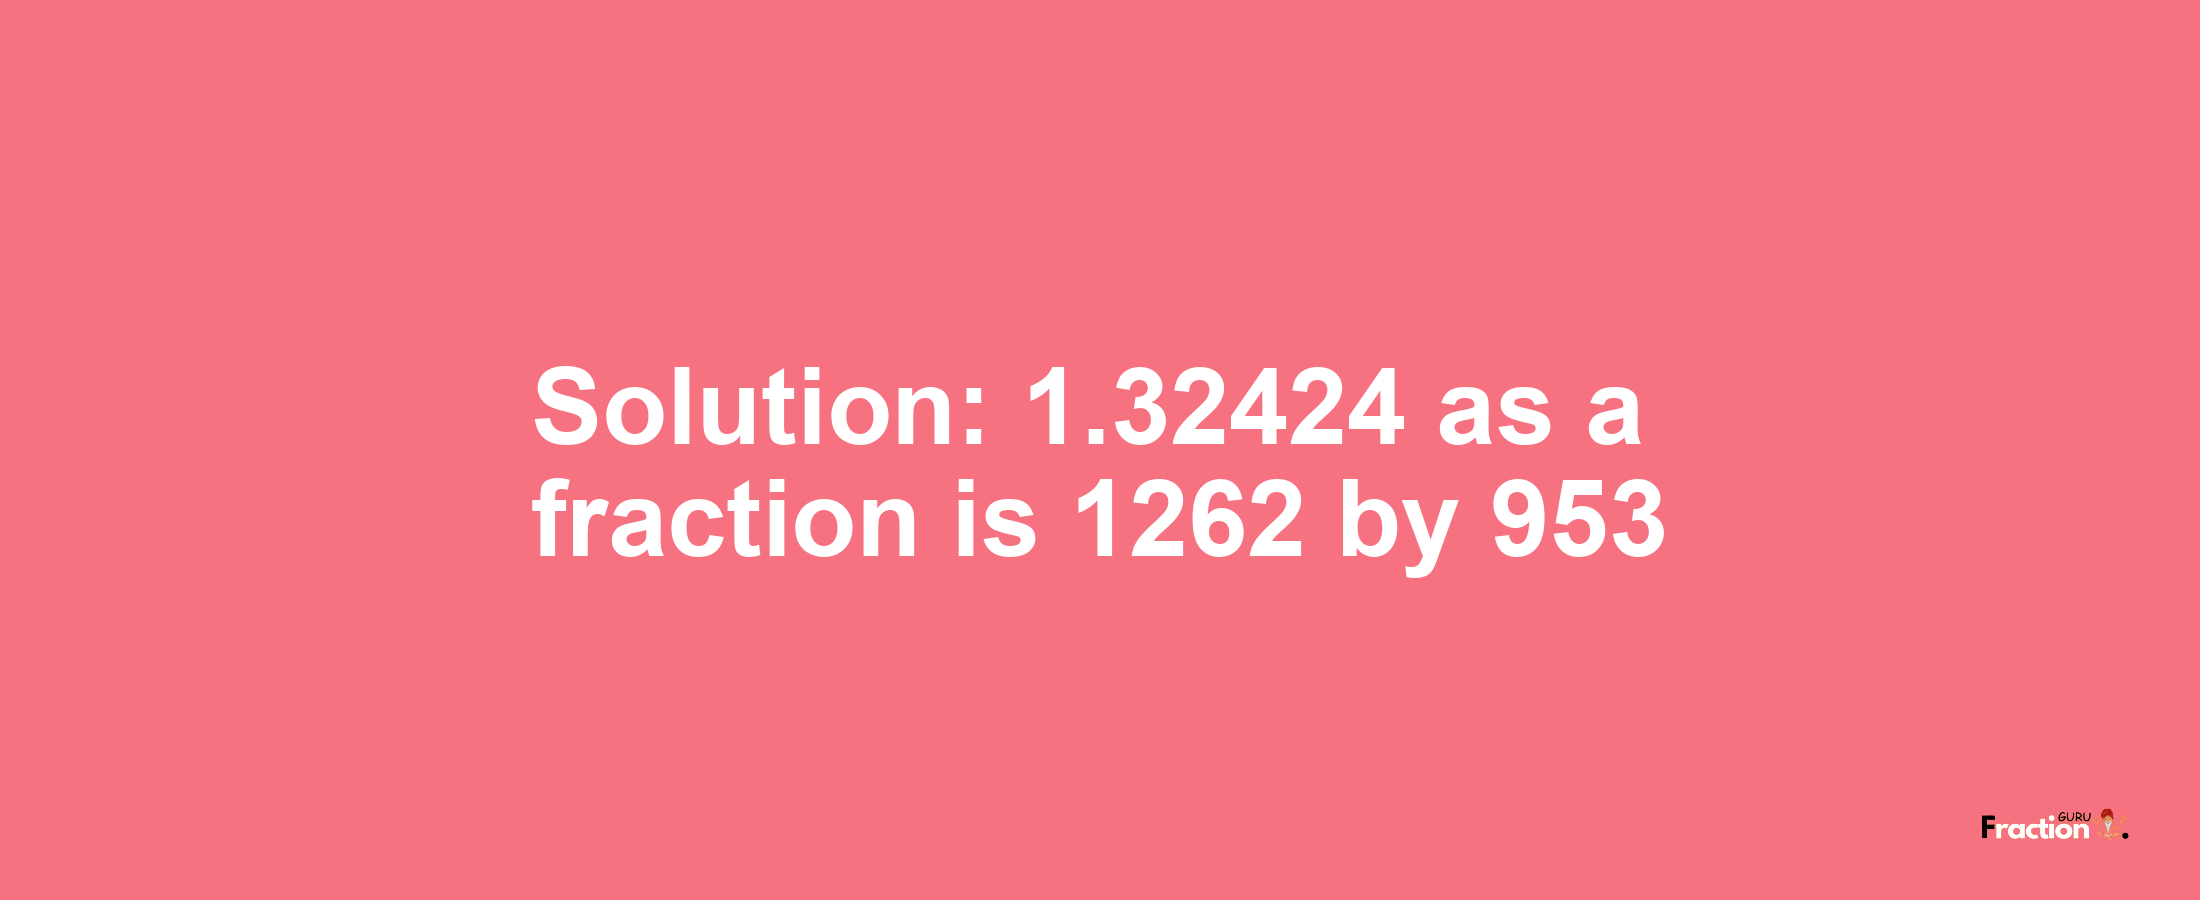 Solution:1.32424 as a fraction is 1262/953